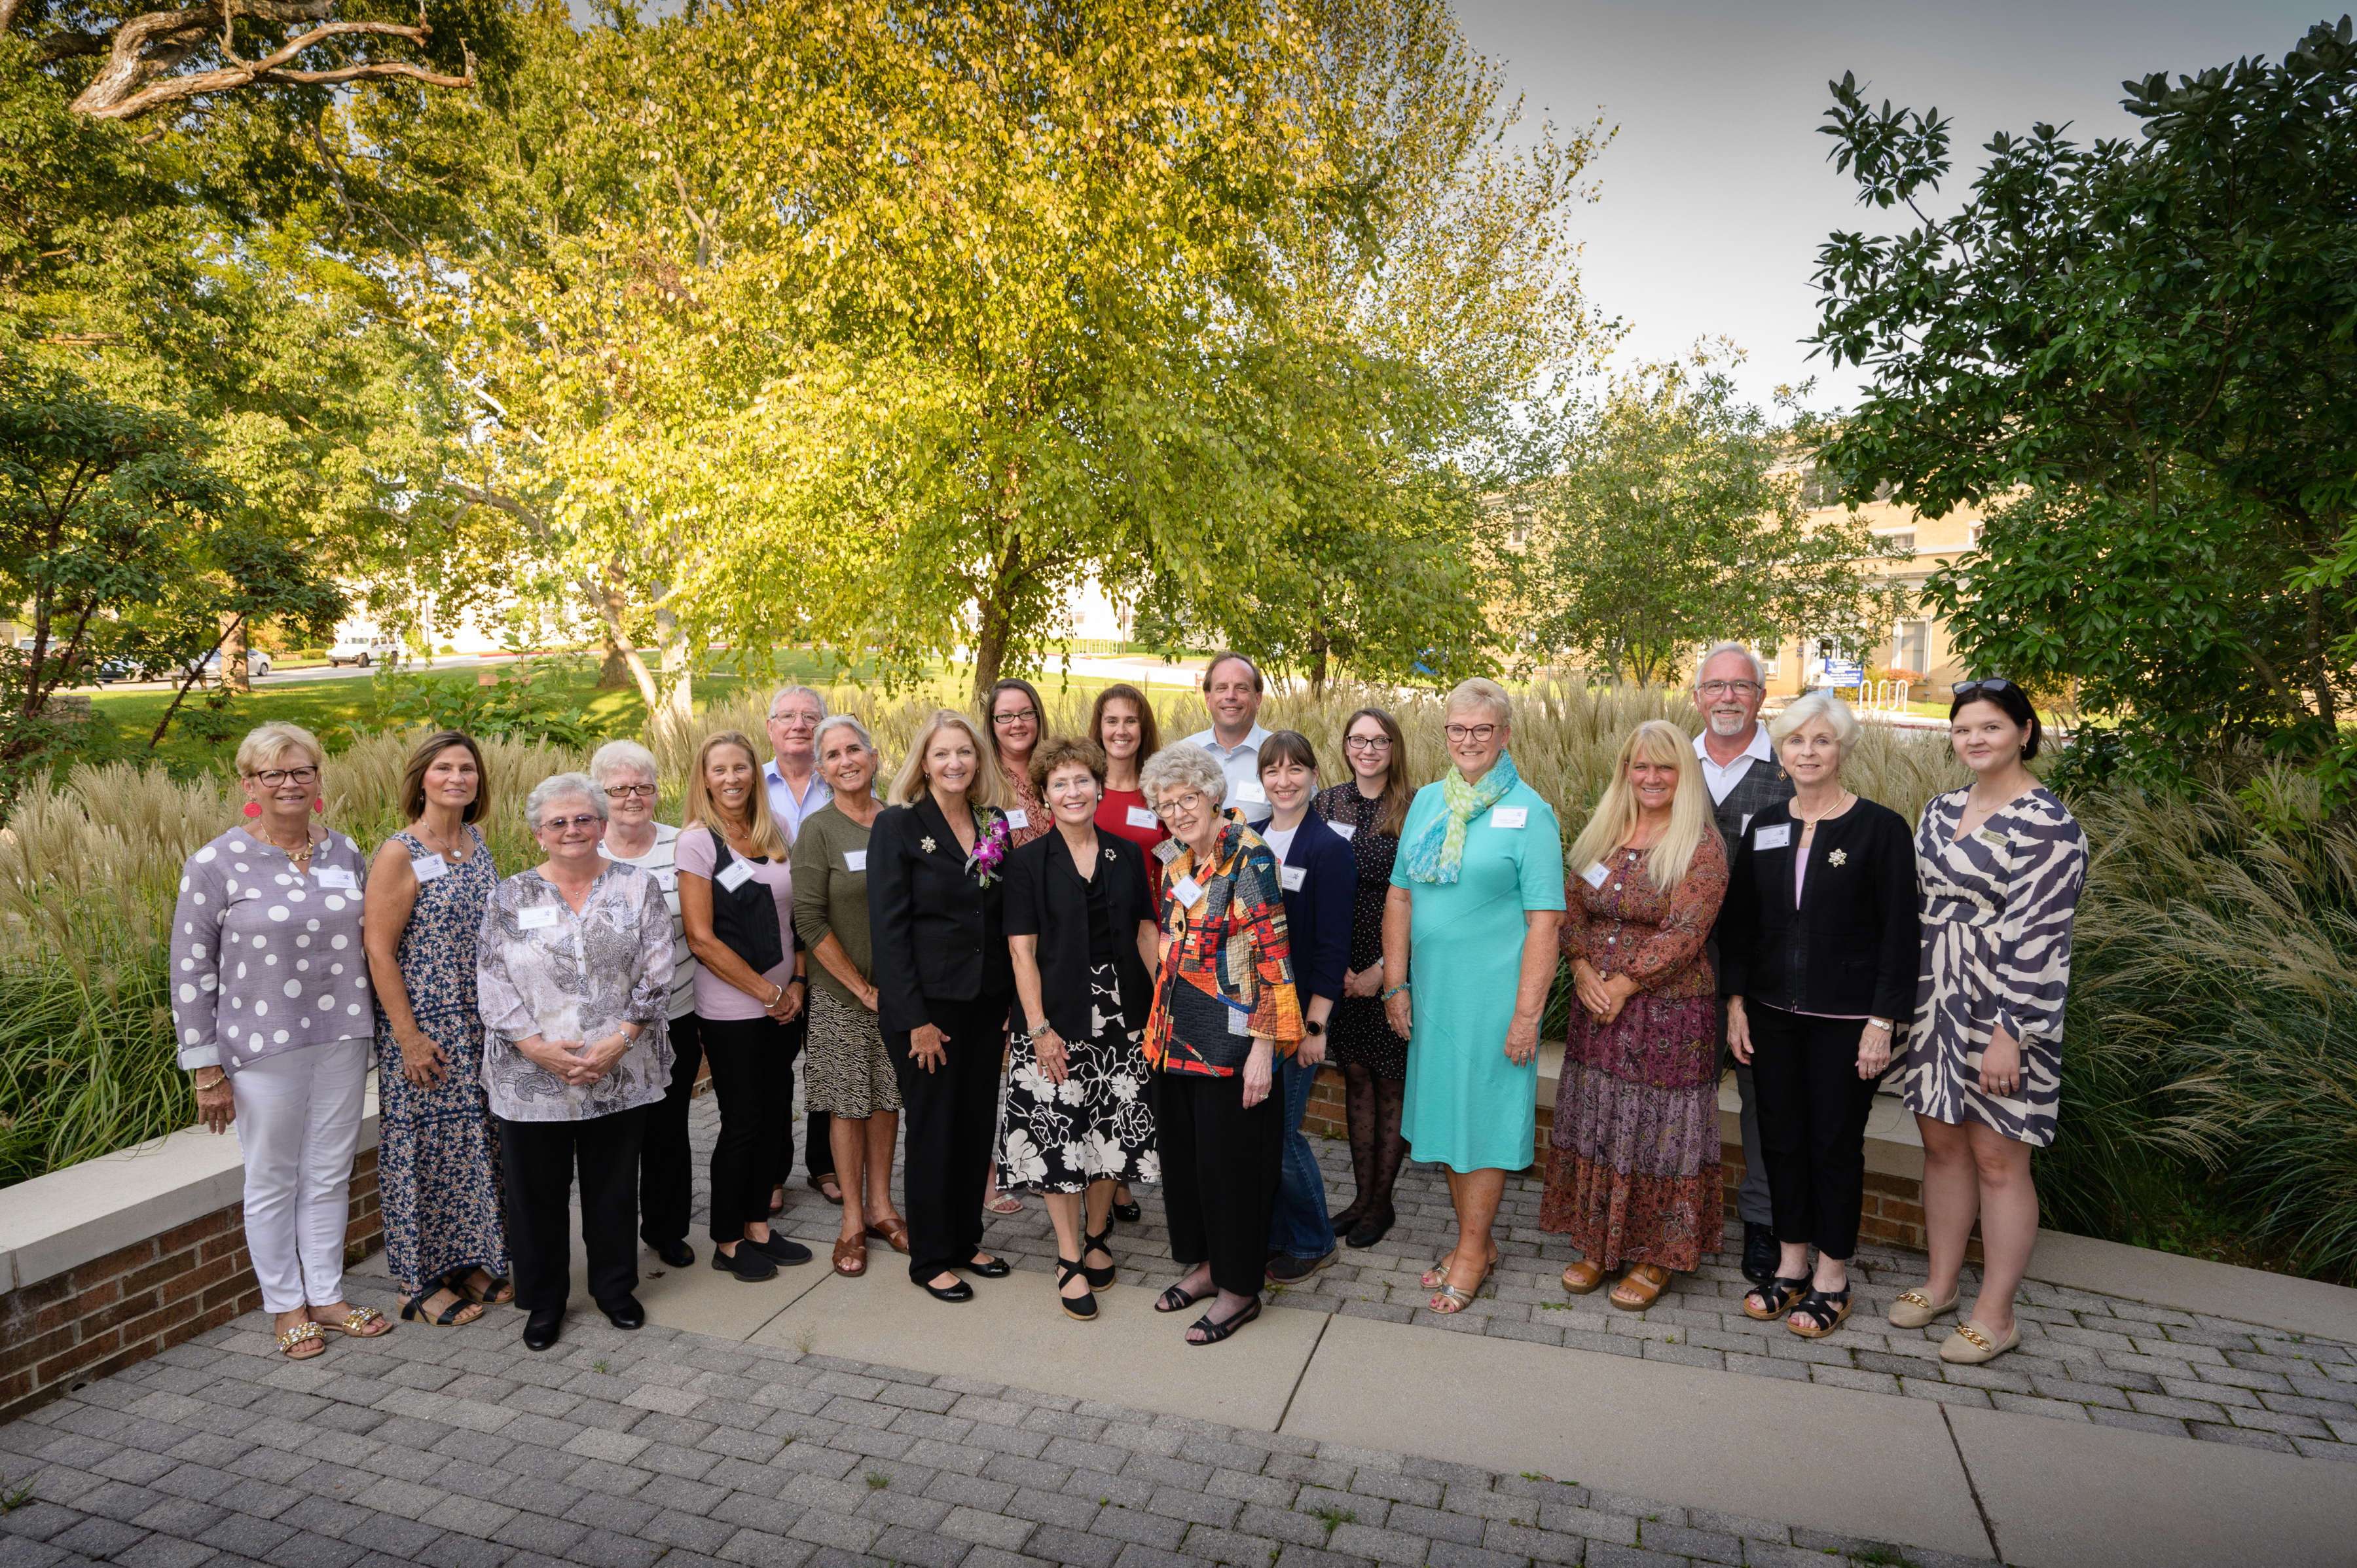 Group photo of WISH grant recipients standing outside the nursing building on a sunny day.